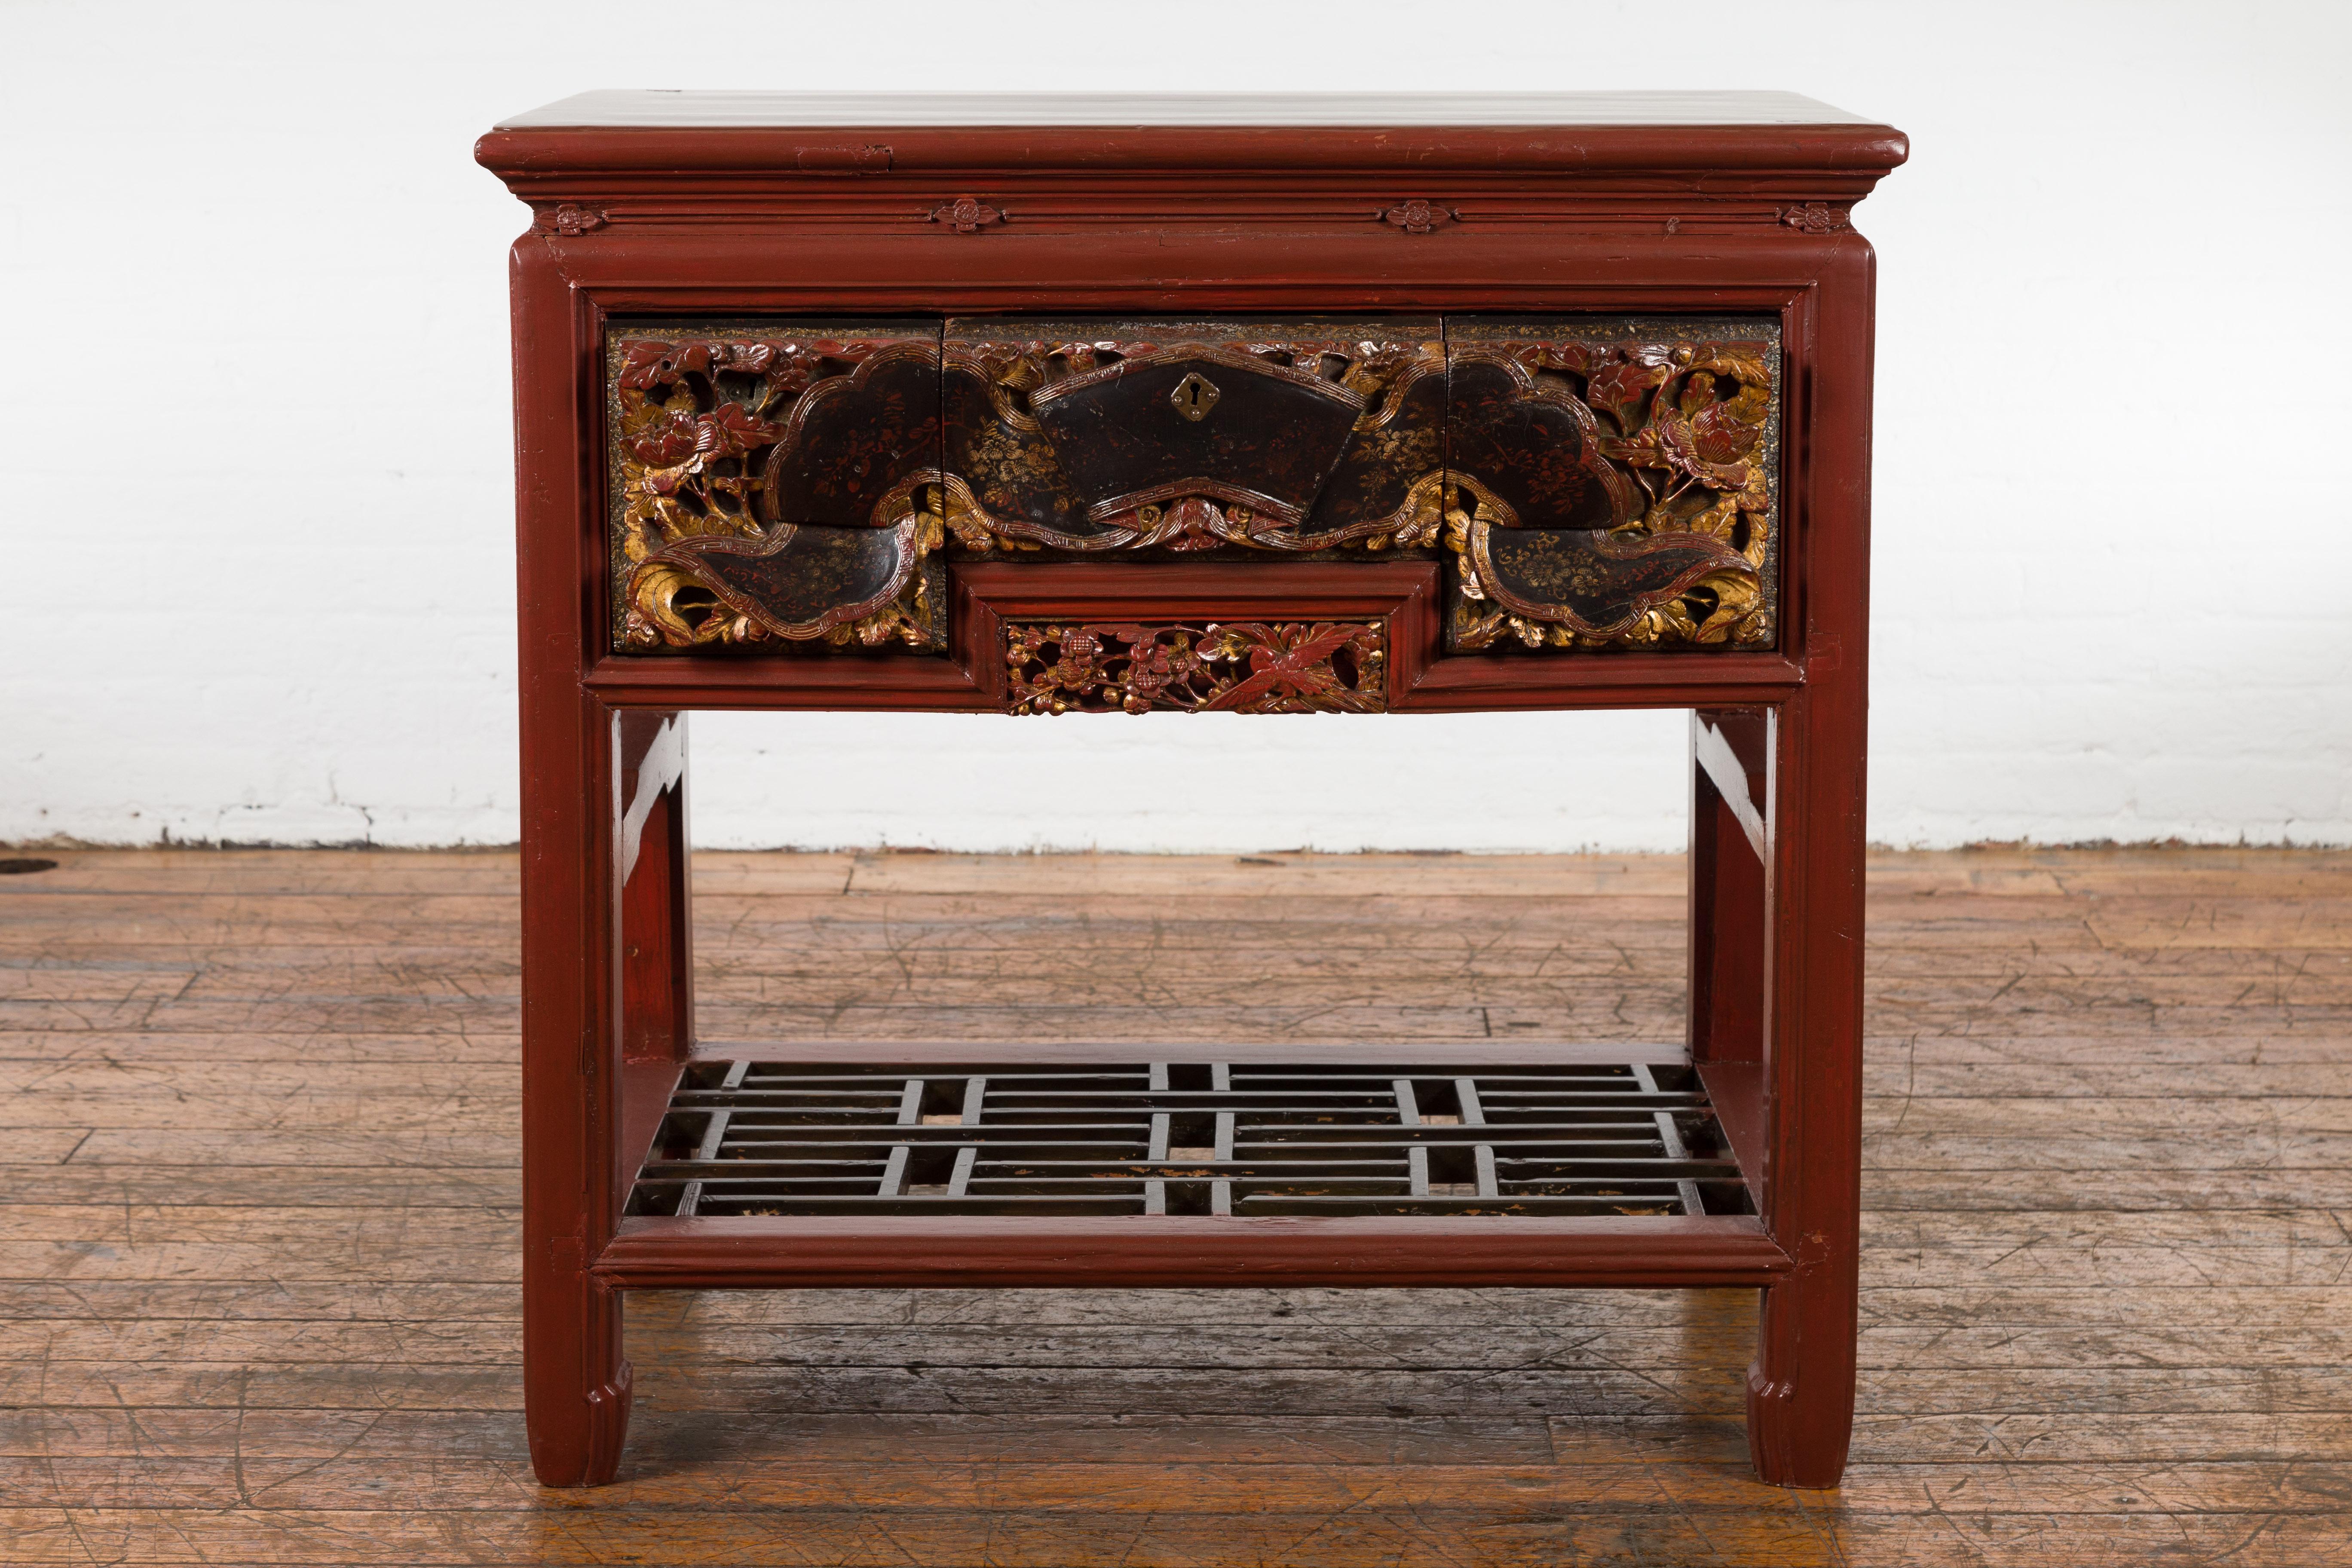 A Chinese red lacquered console table from the 20th century made with 19th century carved pieces, with very unusual hand carved drawers, black and gold highlights and geometric shelf. This exquisite console table features a rectangular top sitting